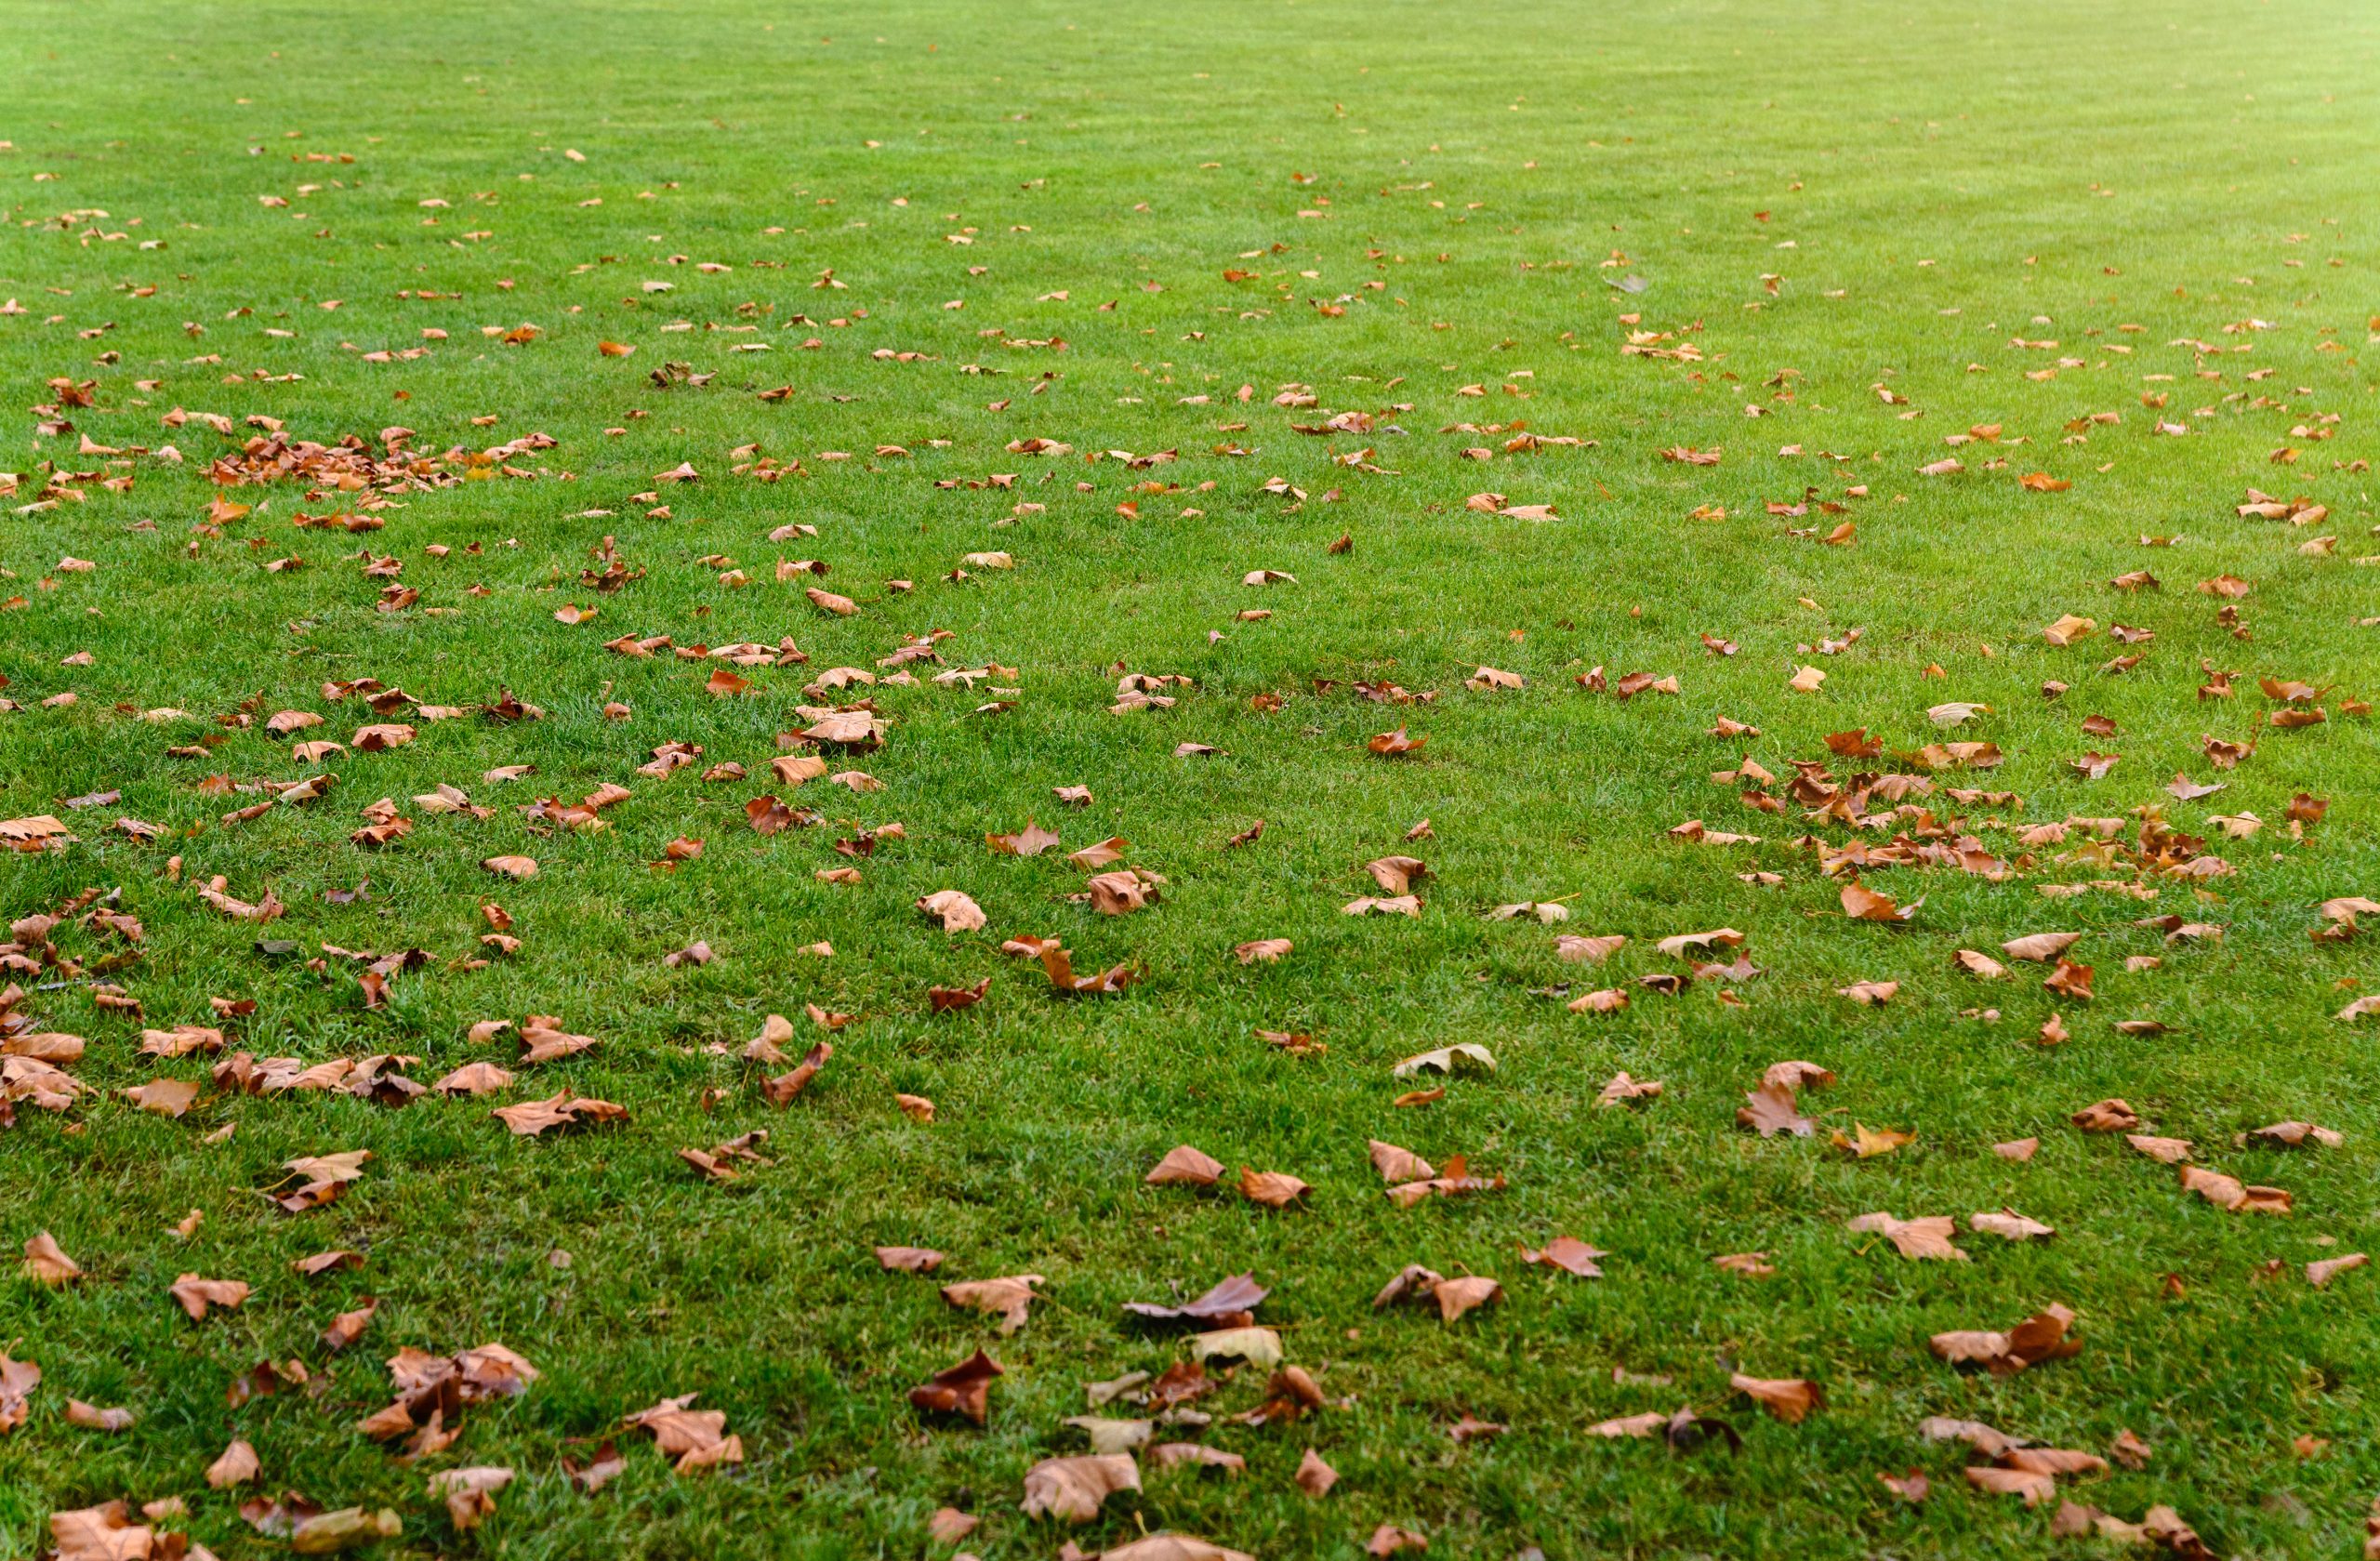 Green lawn with autumn leaves